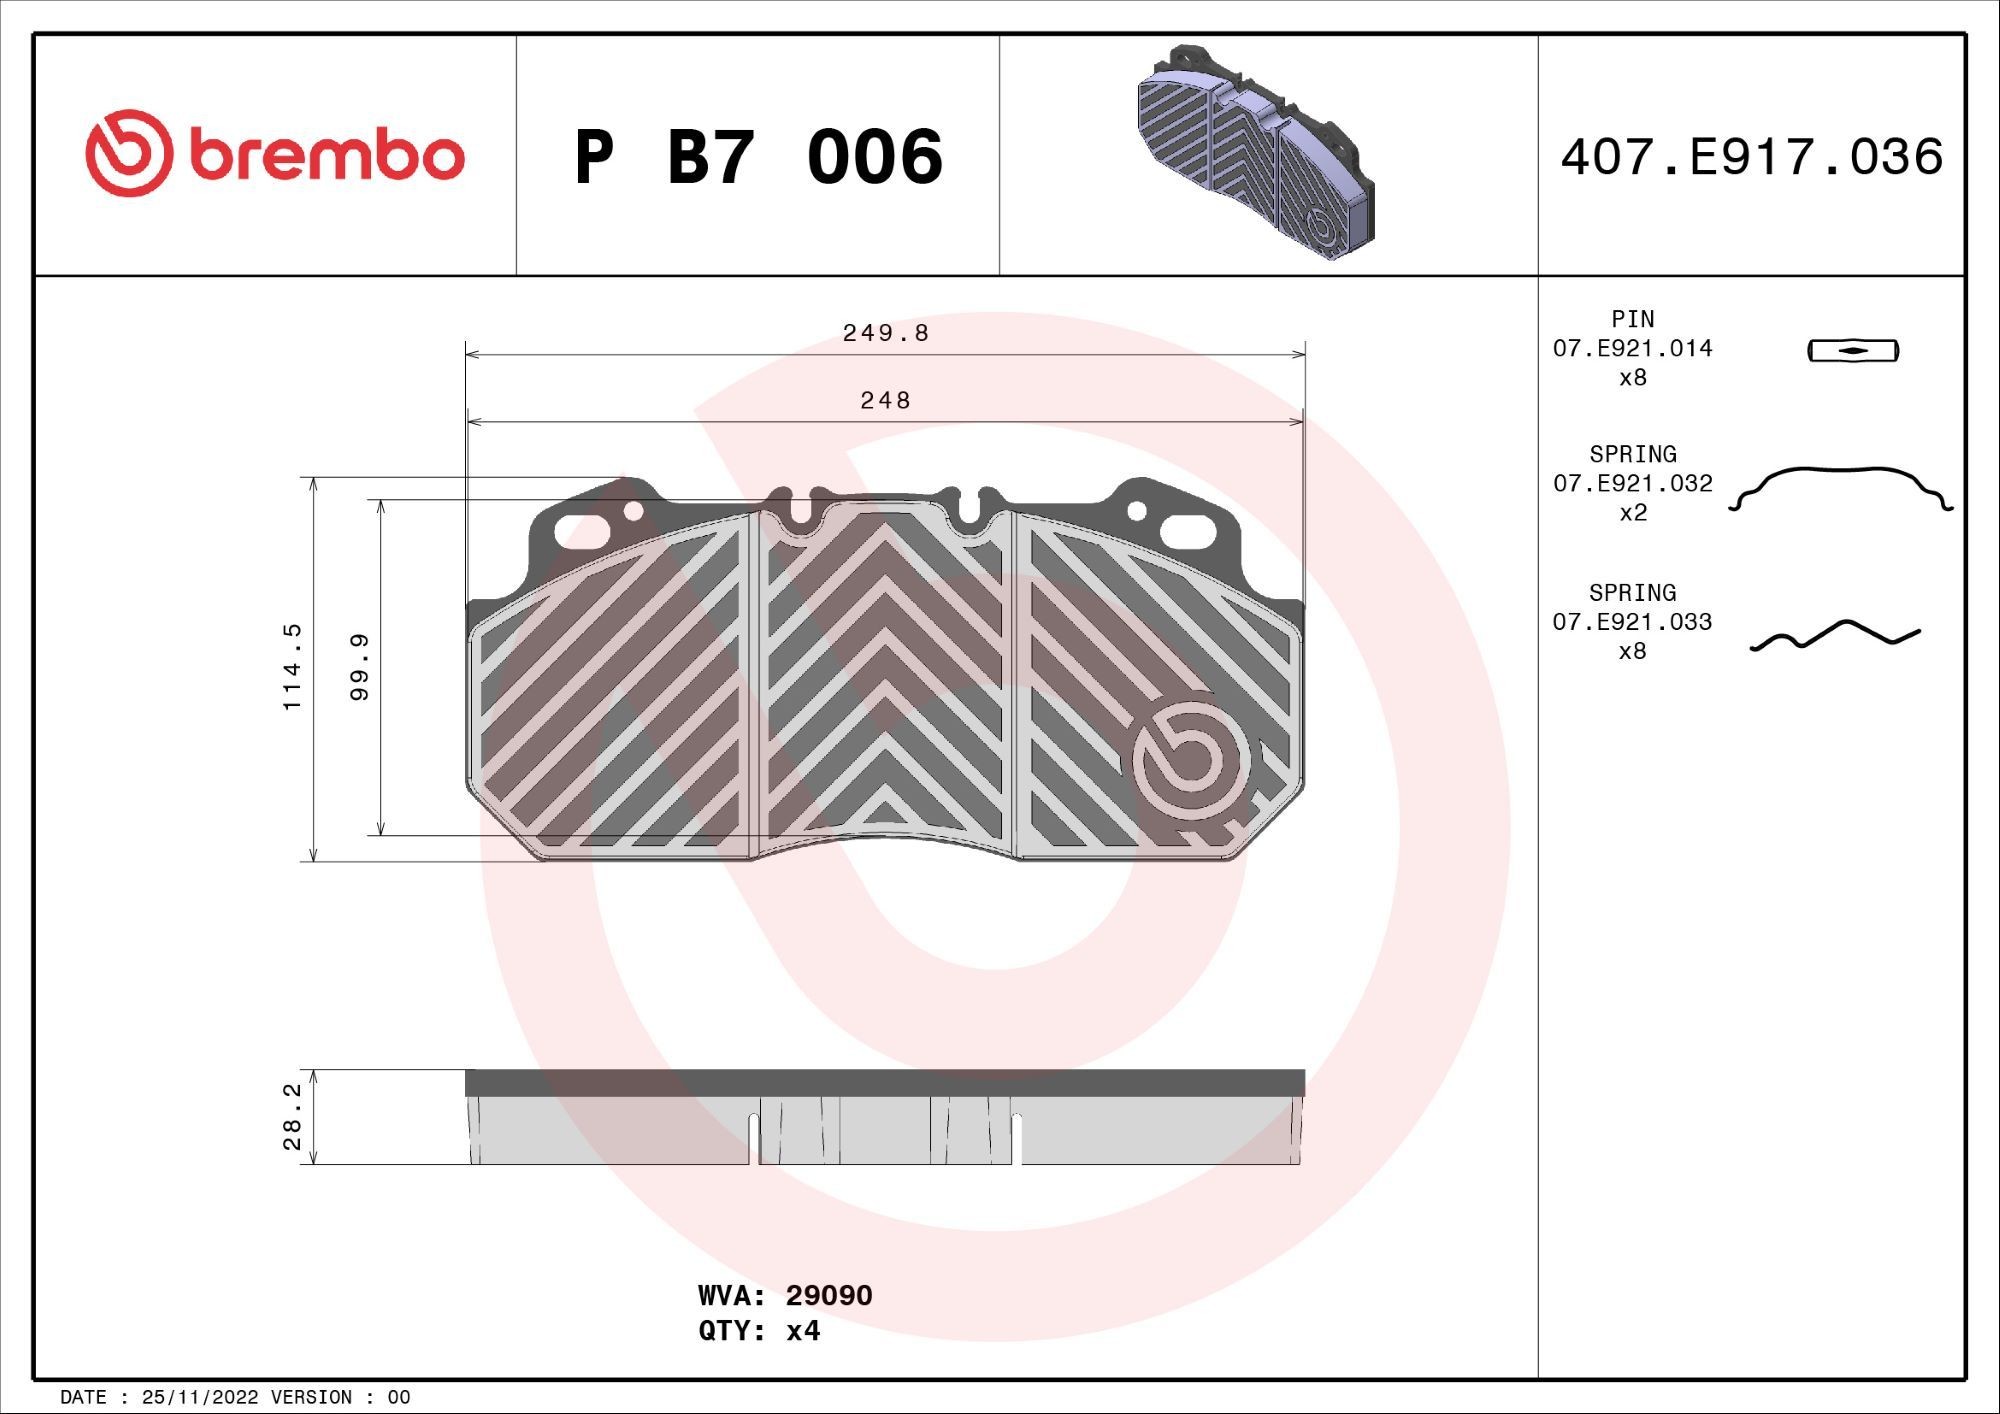 BREMBO P B7 006 Brake pad set prepared for wear indicator, with accessories